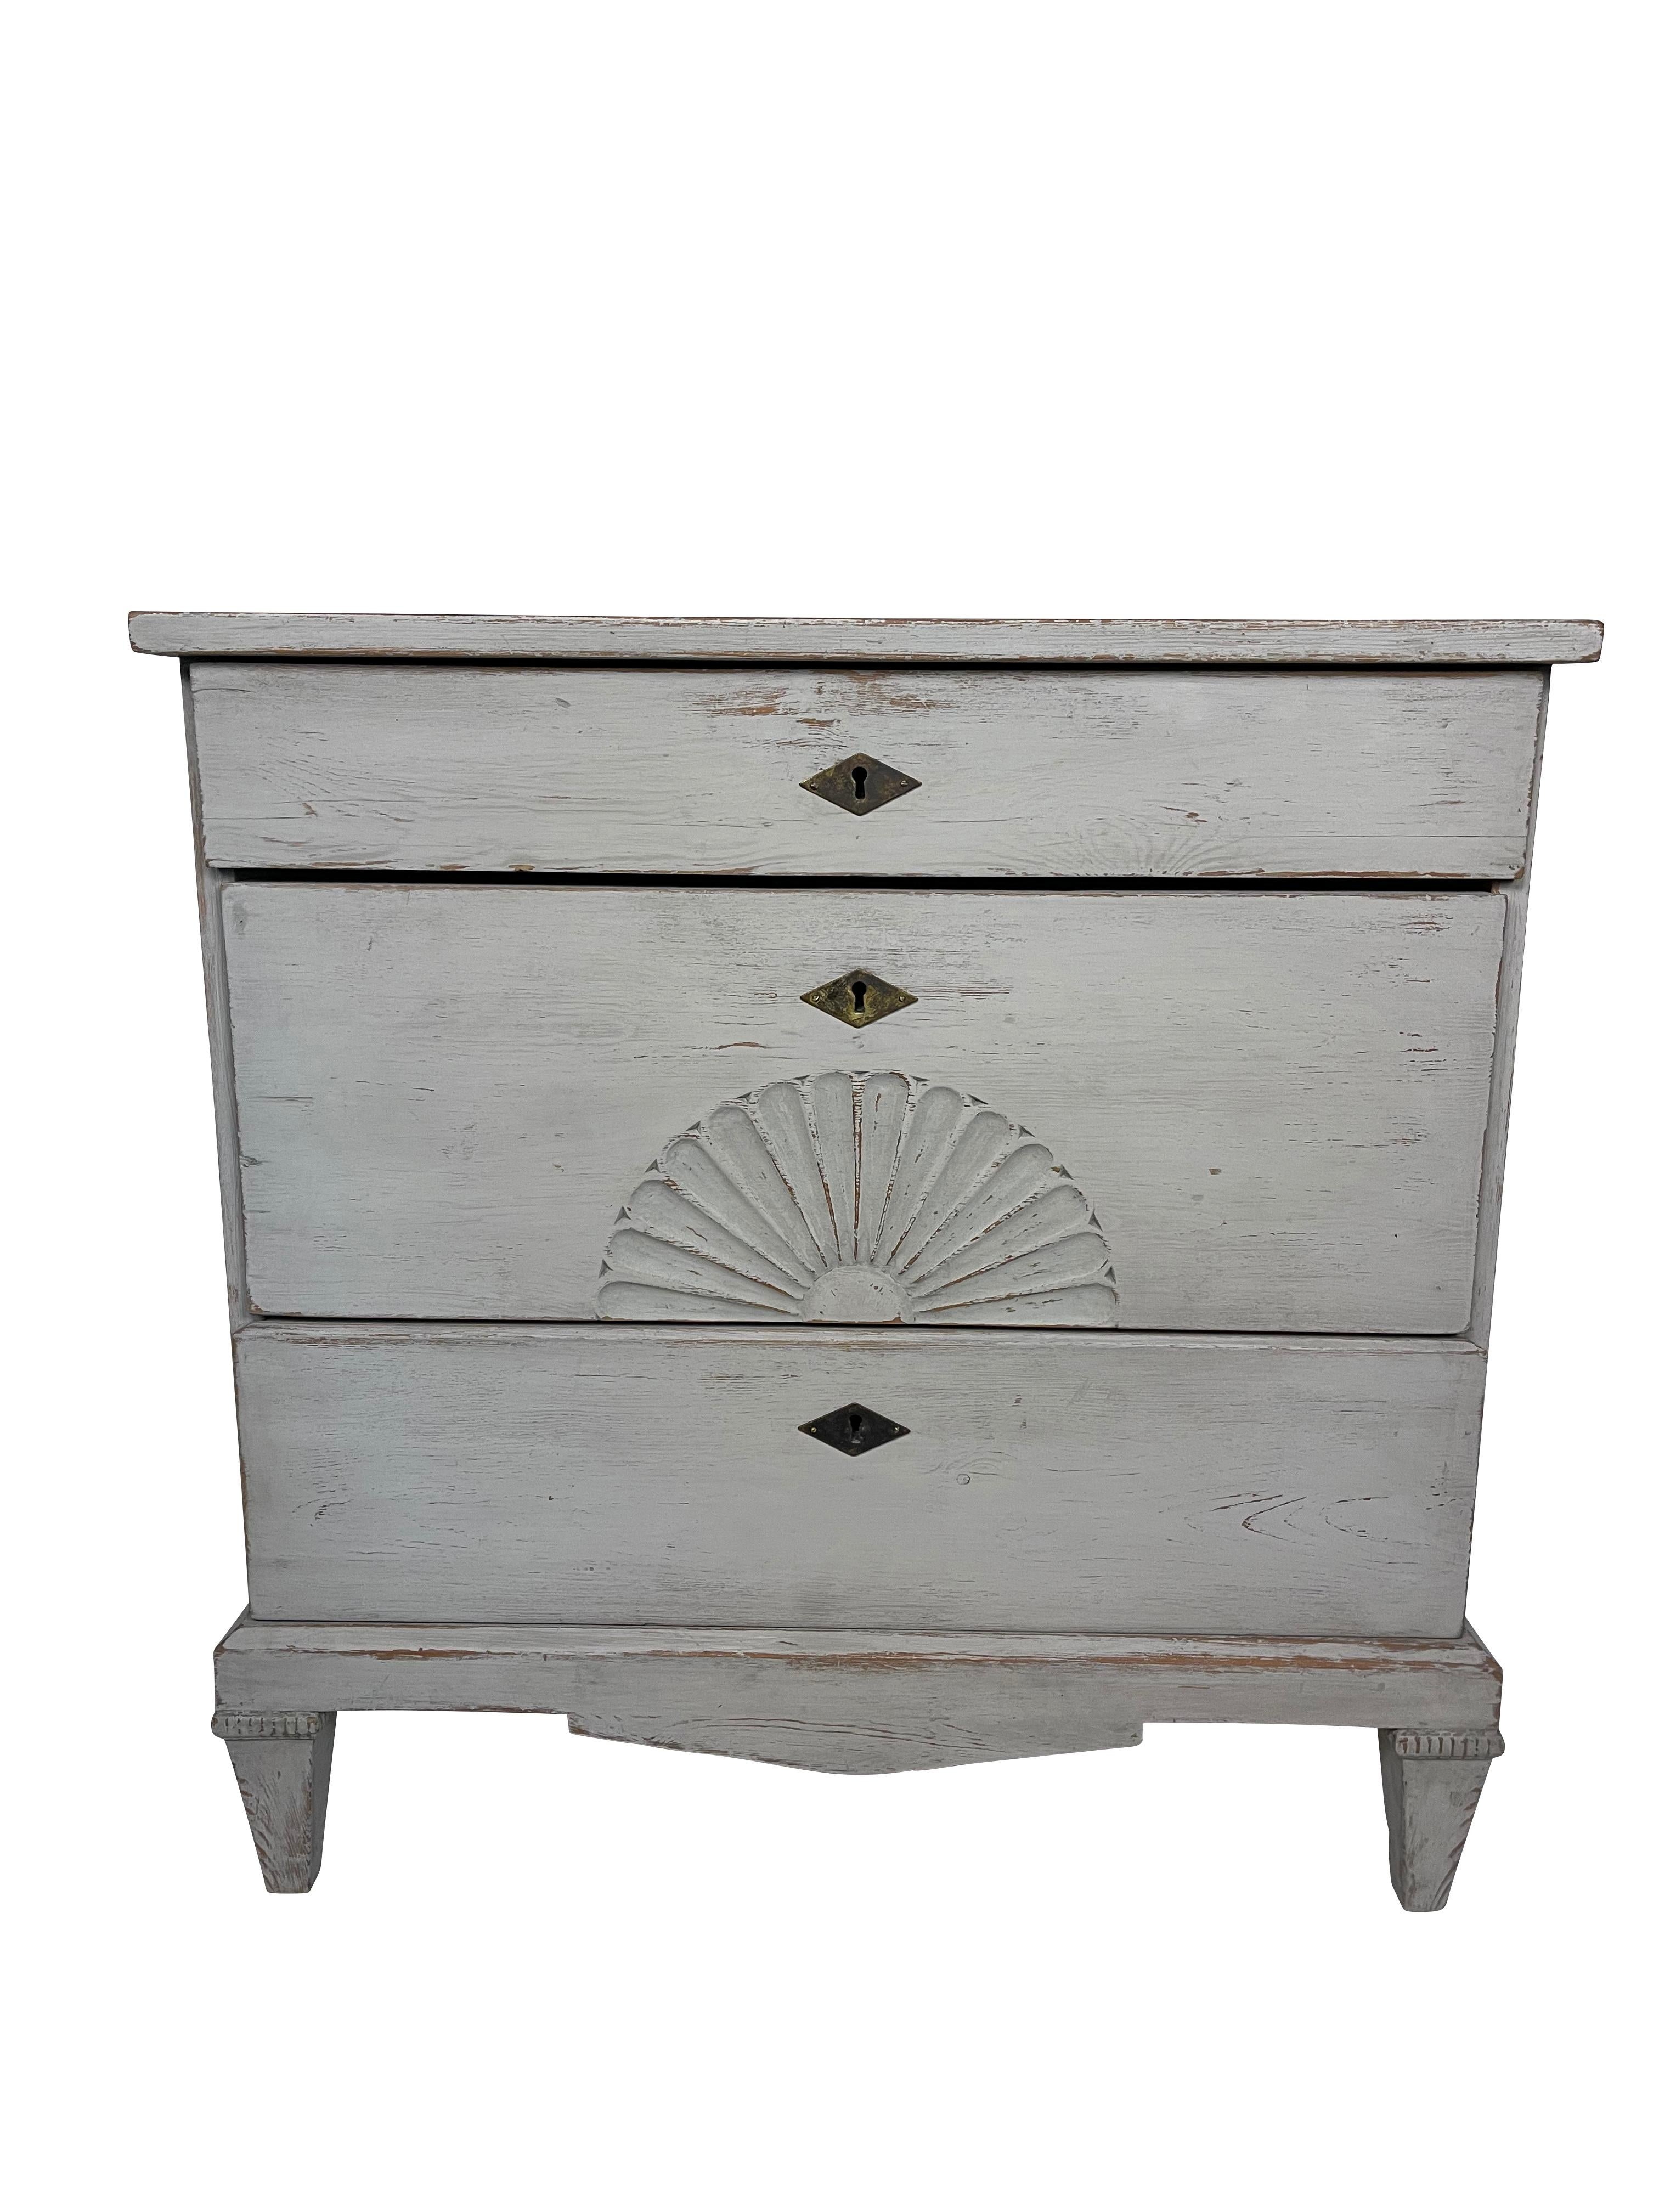 Swedish Gustavian grey painted chest of drawers with carved shell design and three drawers with original key 
Measures: 32